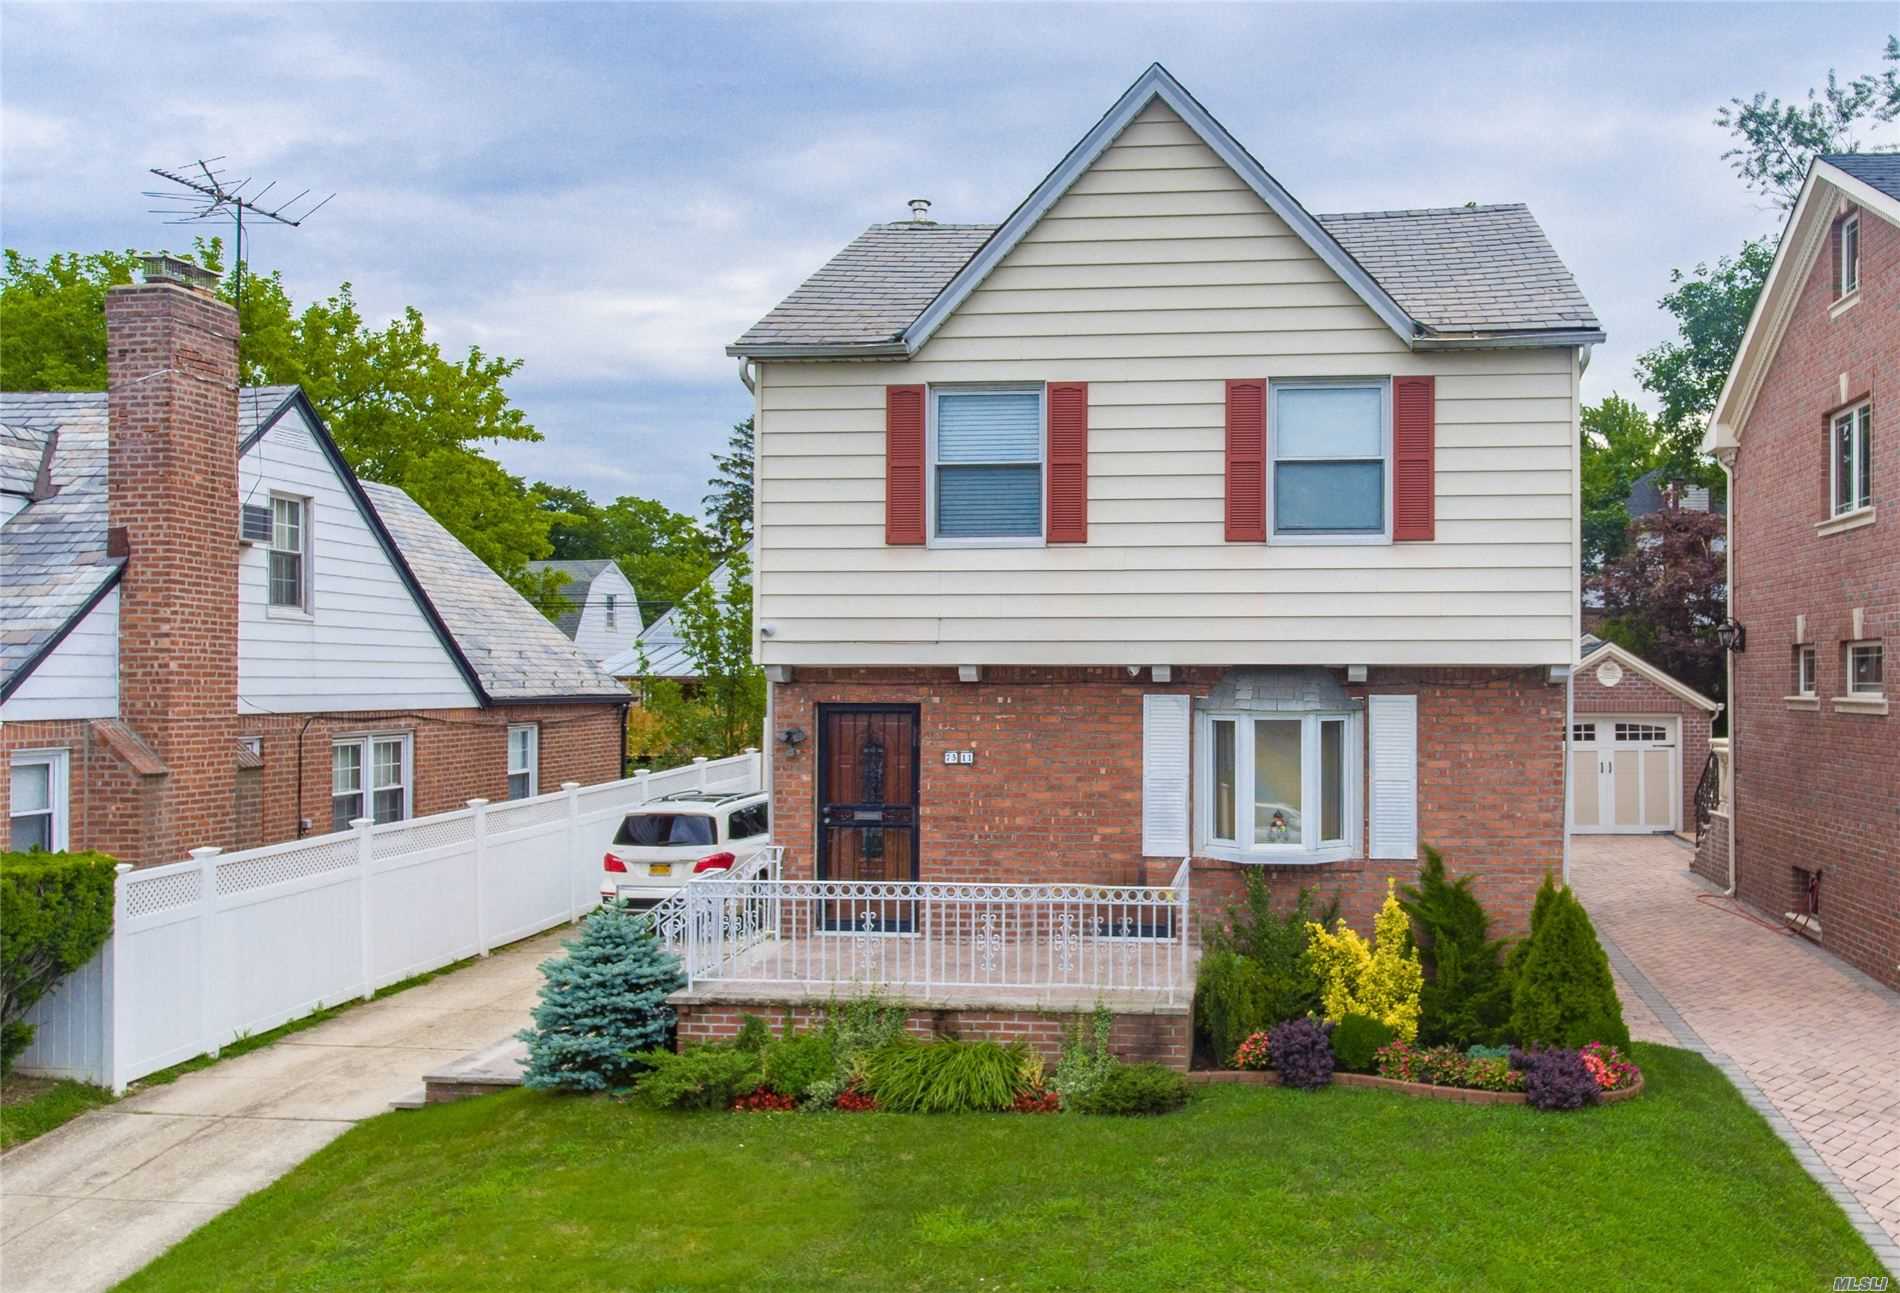 Newly renovated from top to bottom, you can truly move right in to this sunny & spacious colonial! Featuring 4 bedrooms and 2 full baths, a 2-story extension also adds a family room to the first floor of this brick & frame home.